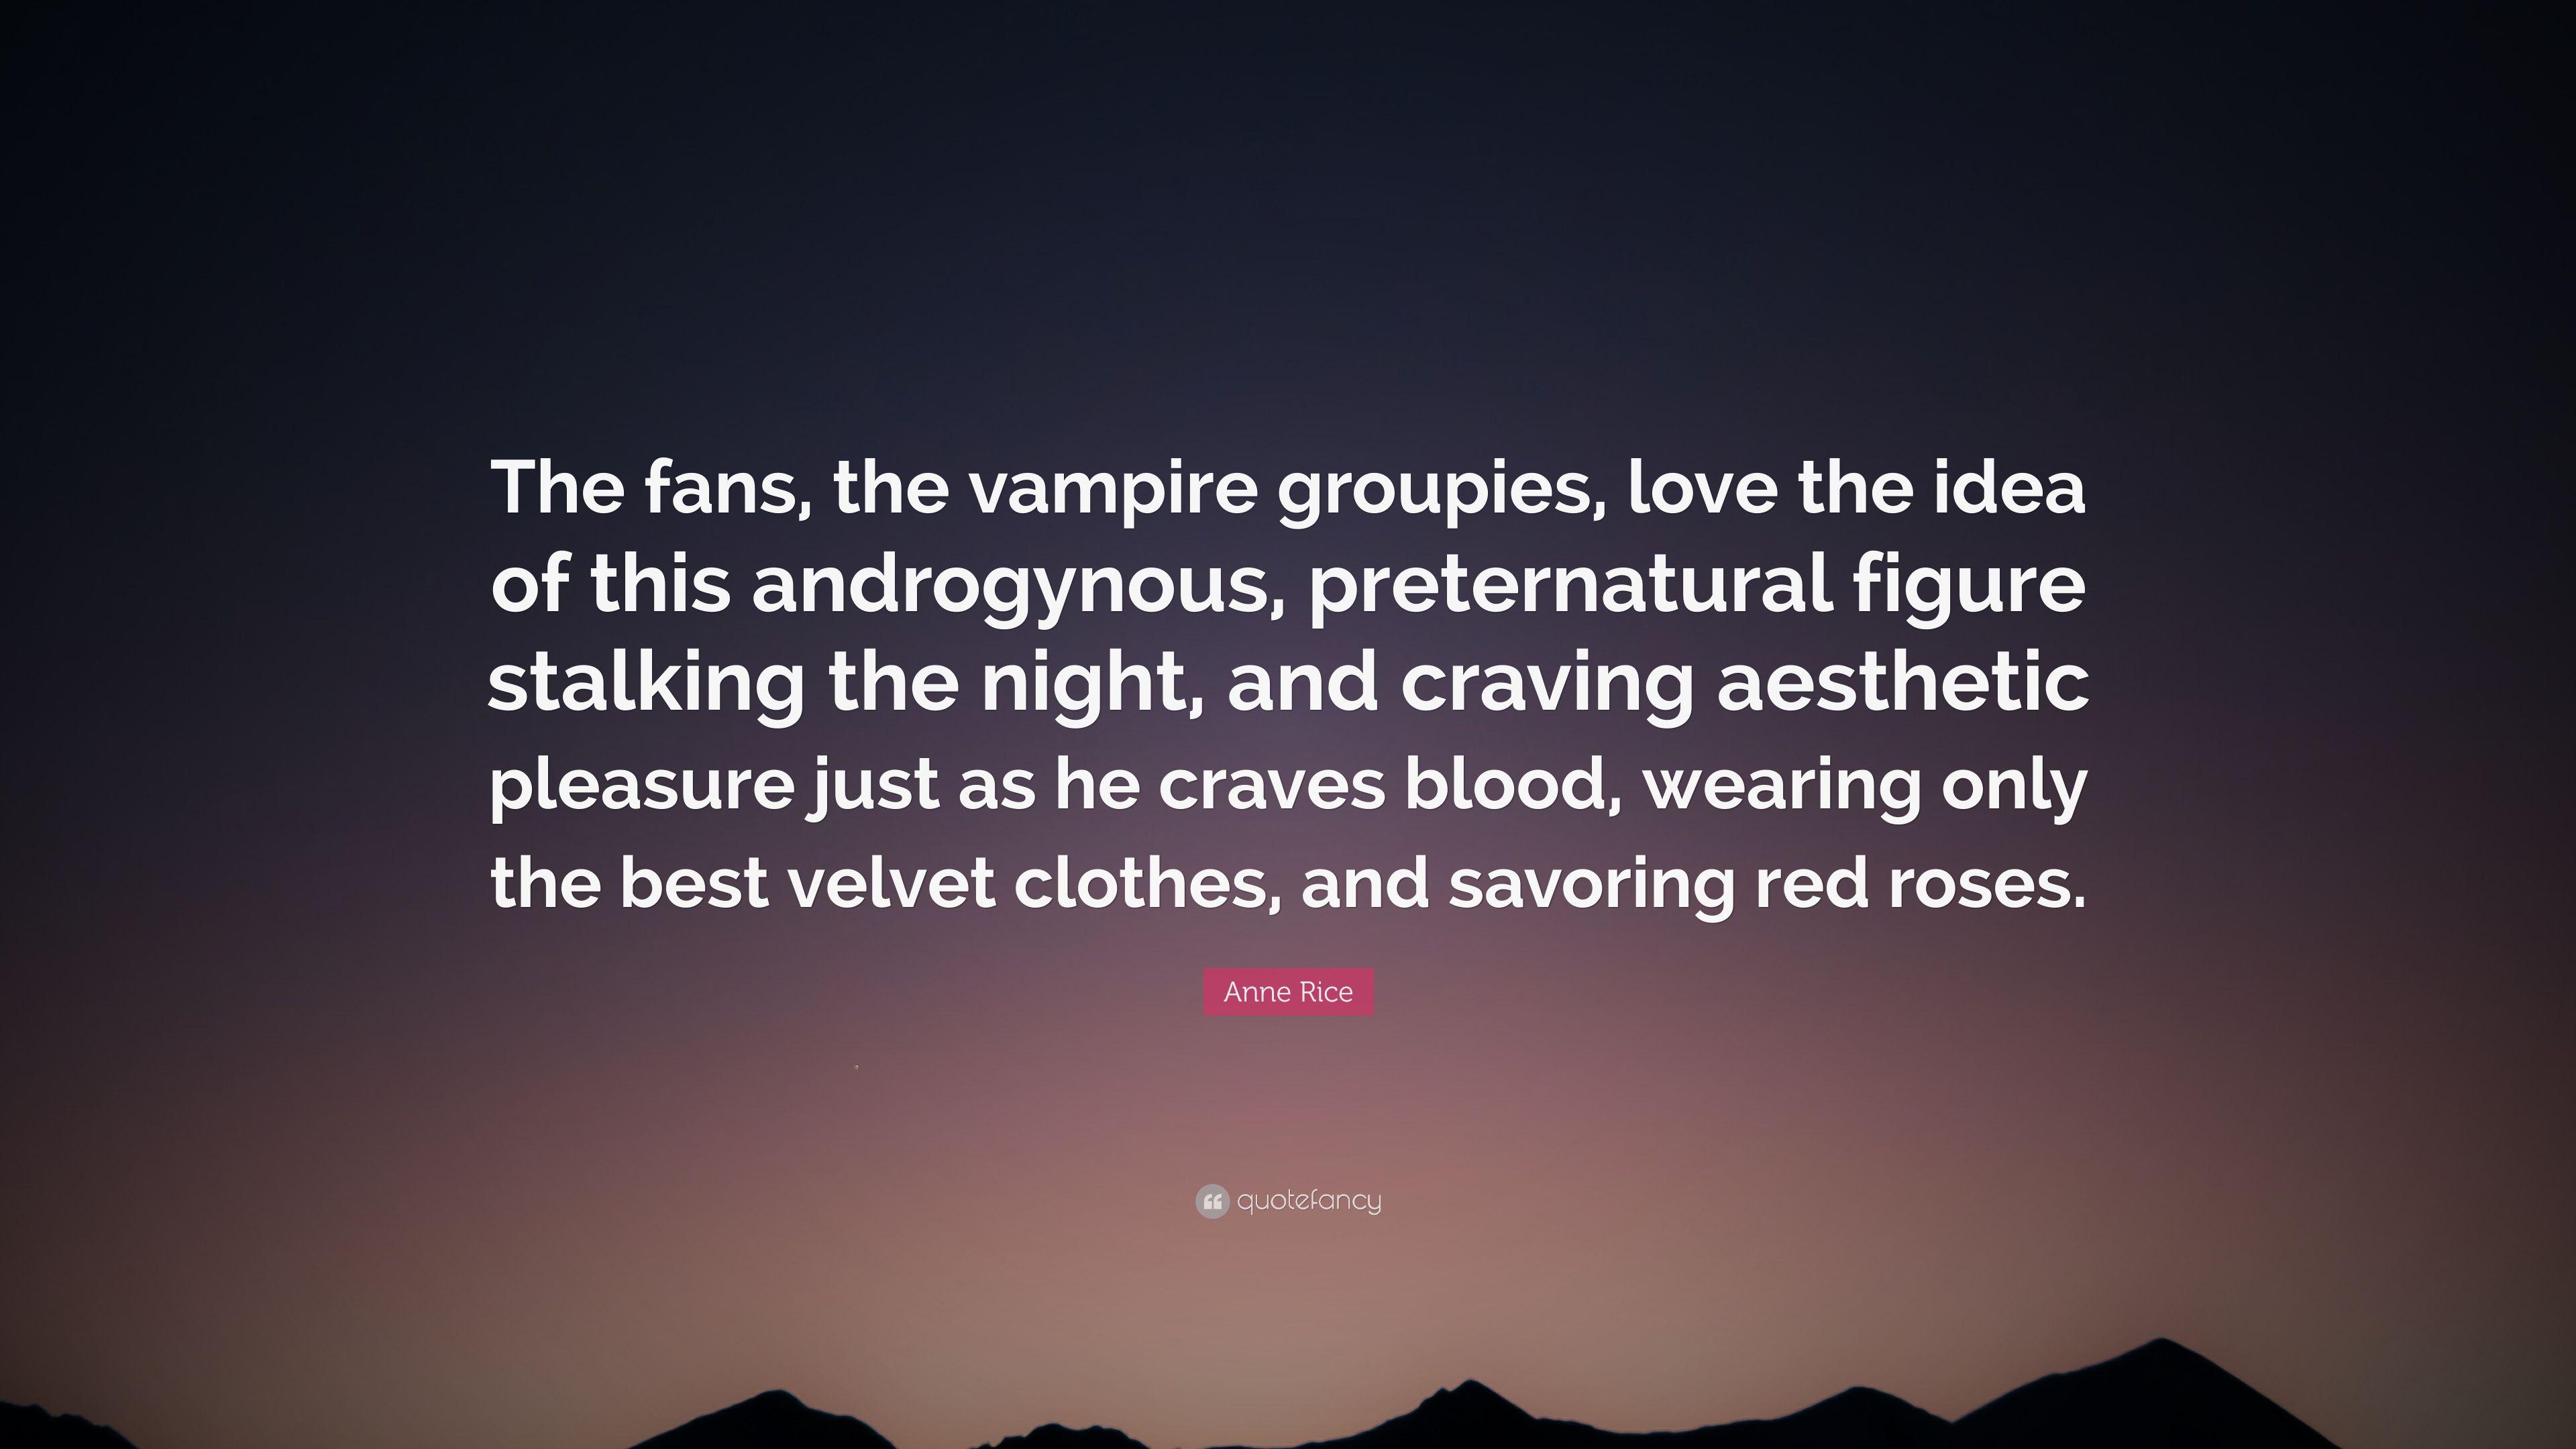 Anne Rice Quote: “The fans, the vampire groupies, love the idea